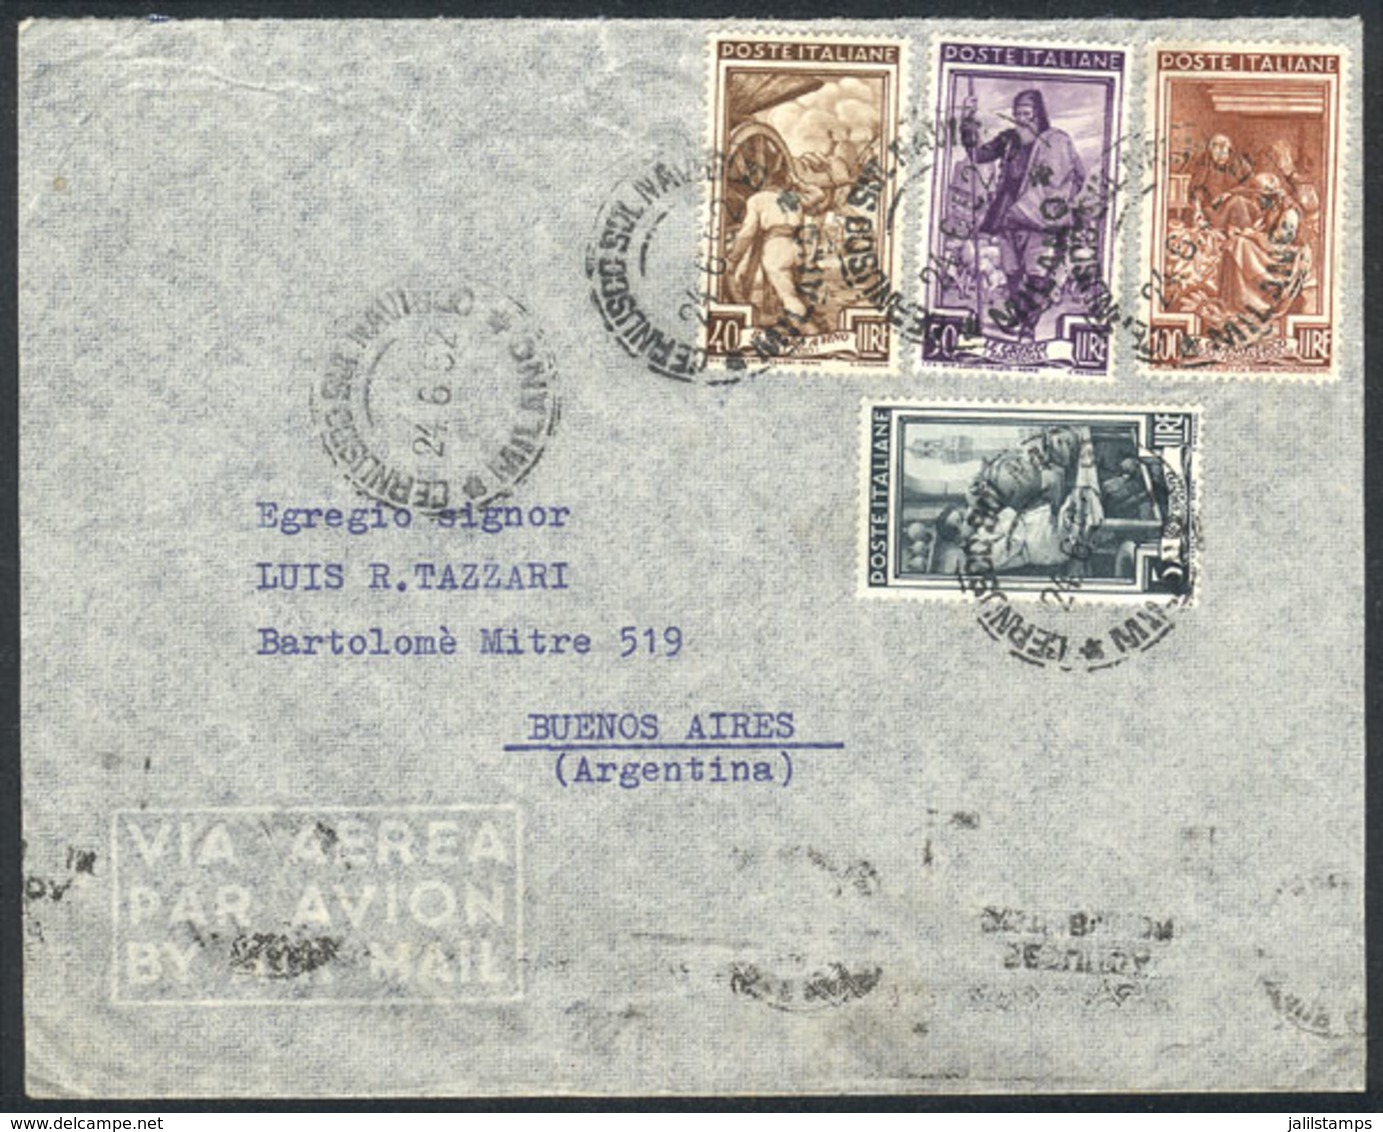 ITALY: Cover Franked By Sa.651 + Other Values (total 195L.), Sent From Cernusco To Argentina On 24/JUN/1952, Very Fine Q - Ohne Zuordnung